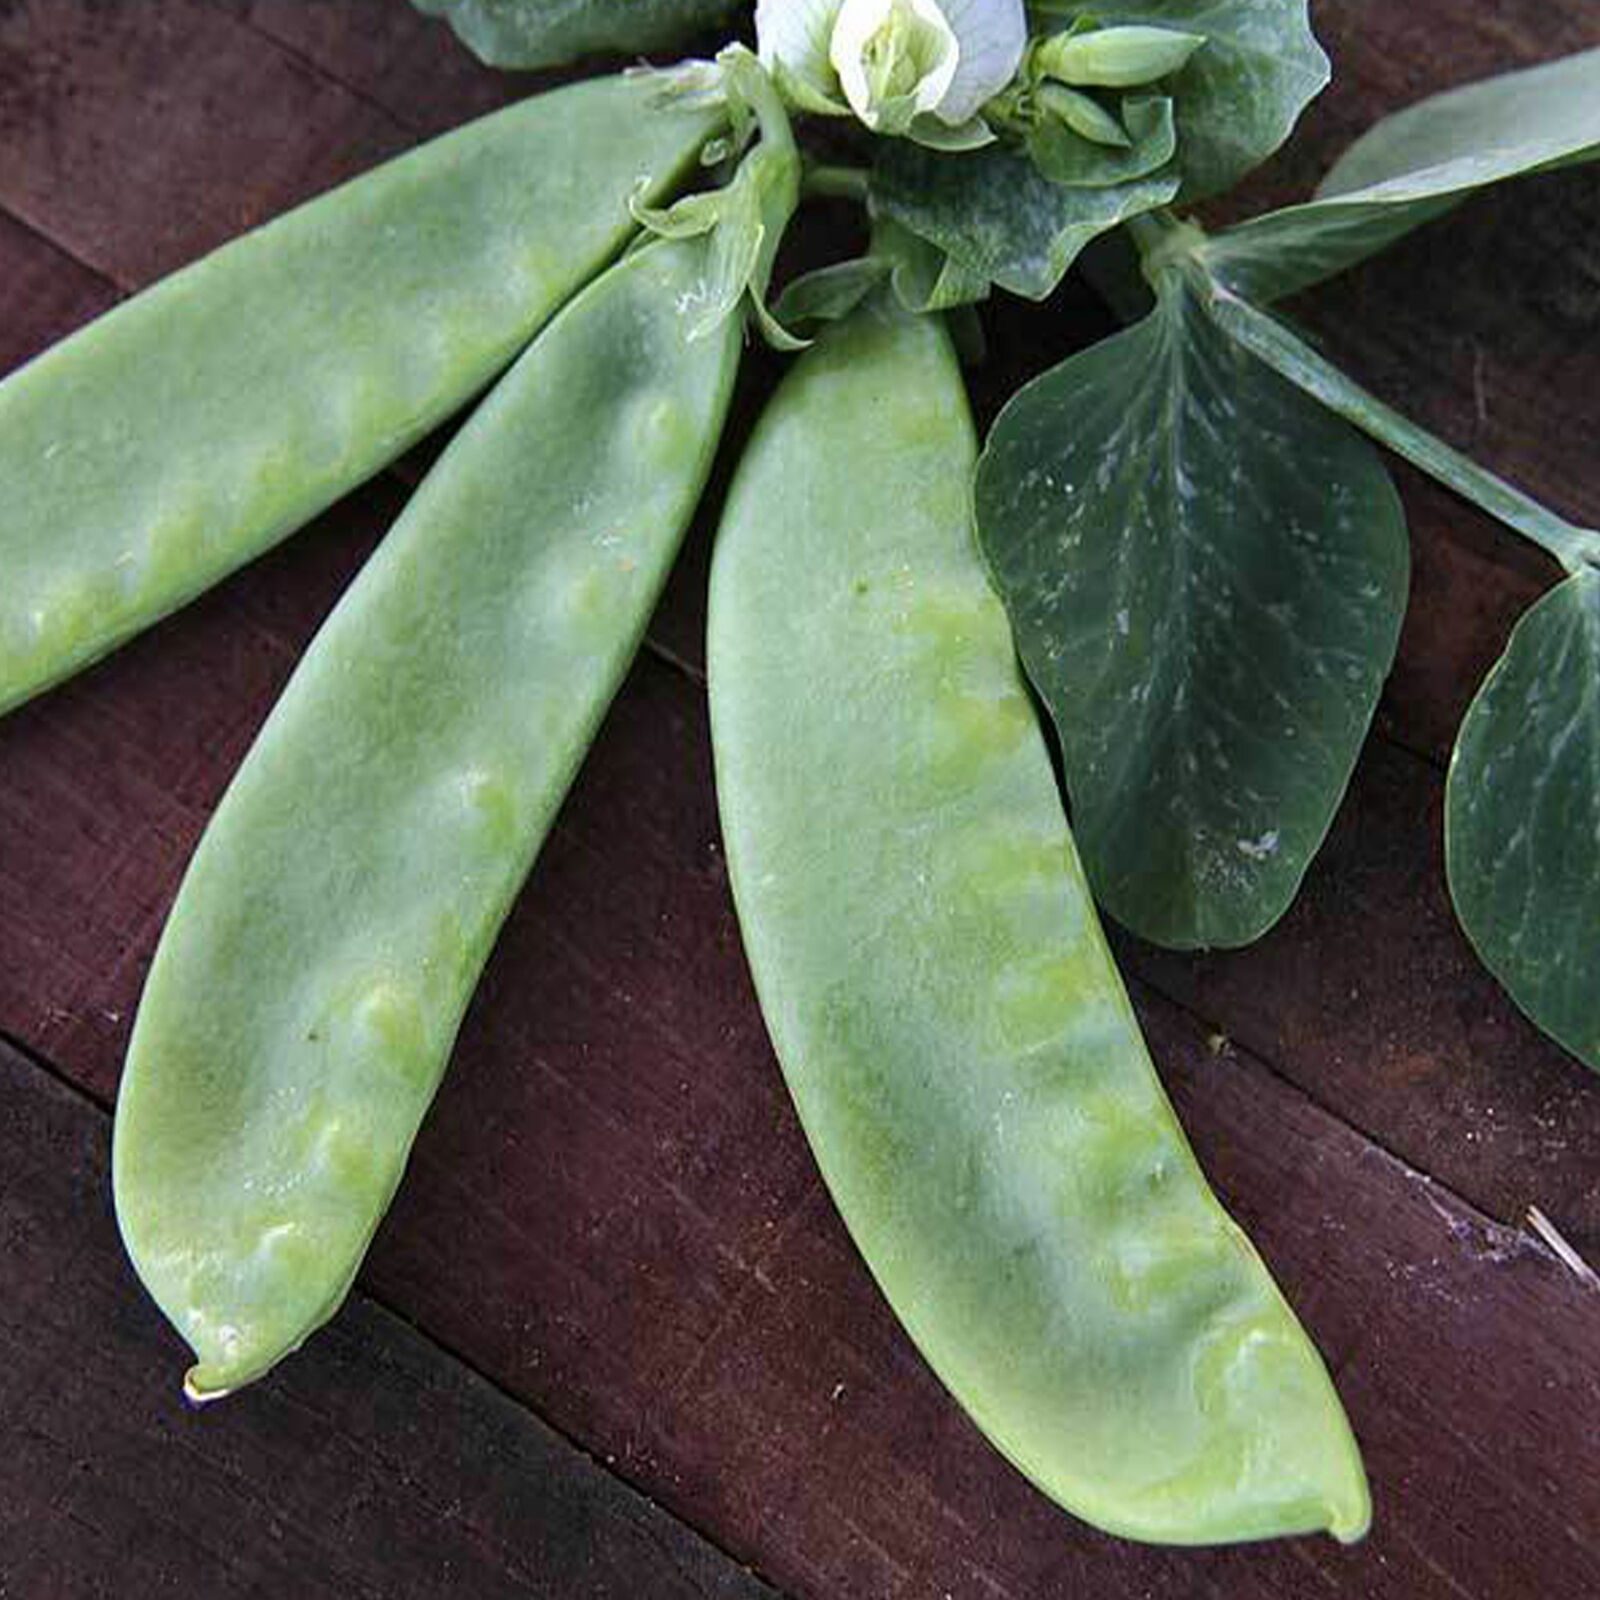 SHIP FROM US OREGON GIANT PEA SEEDS - 10 LB SEEDS - HEIRLOOM, NON-GMO, TM11 - $144.96